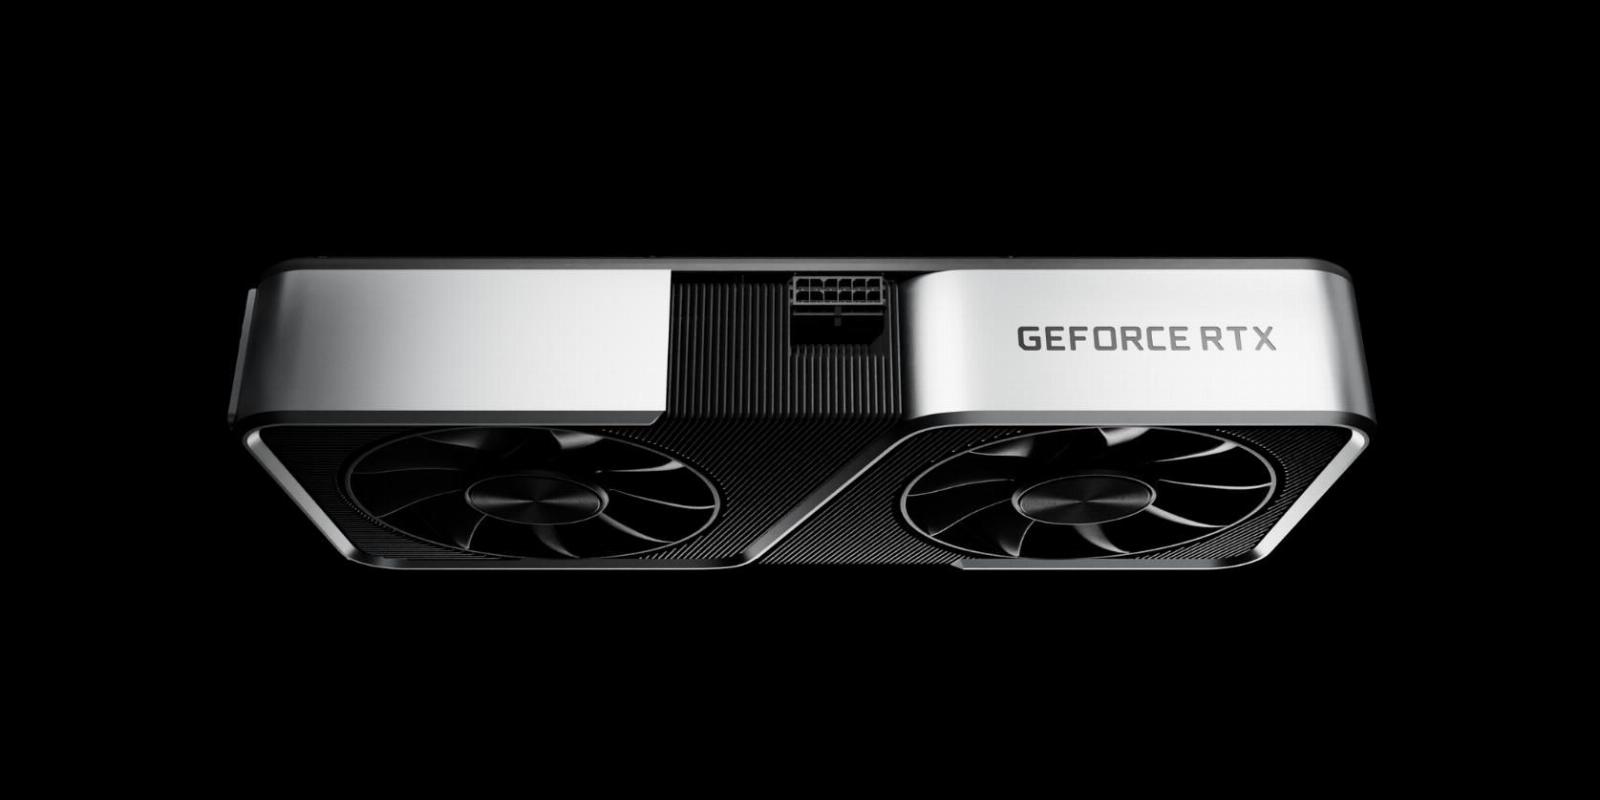 What Is the Difference? Nvidia GeForce RTX 3060 vs. 3060 Ti